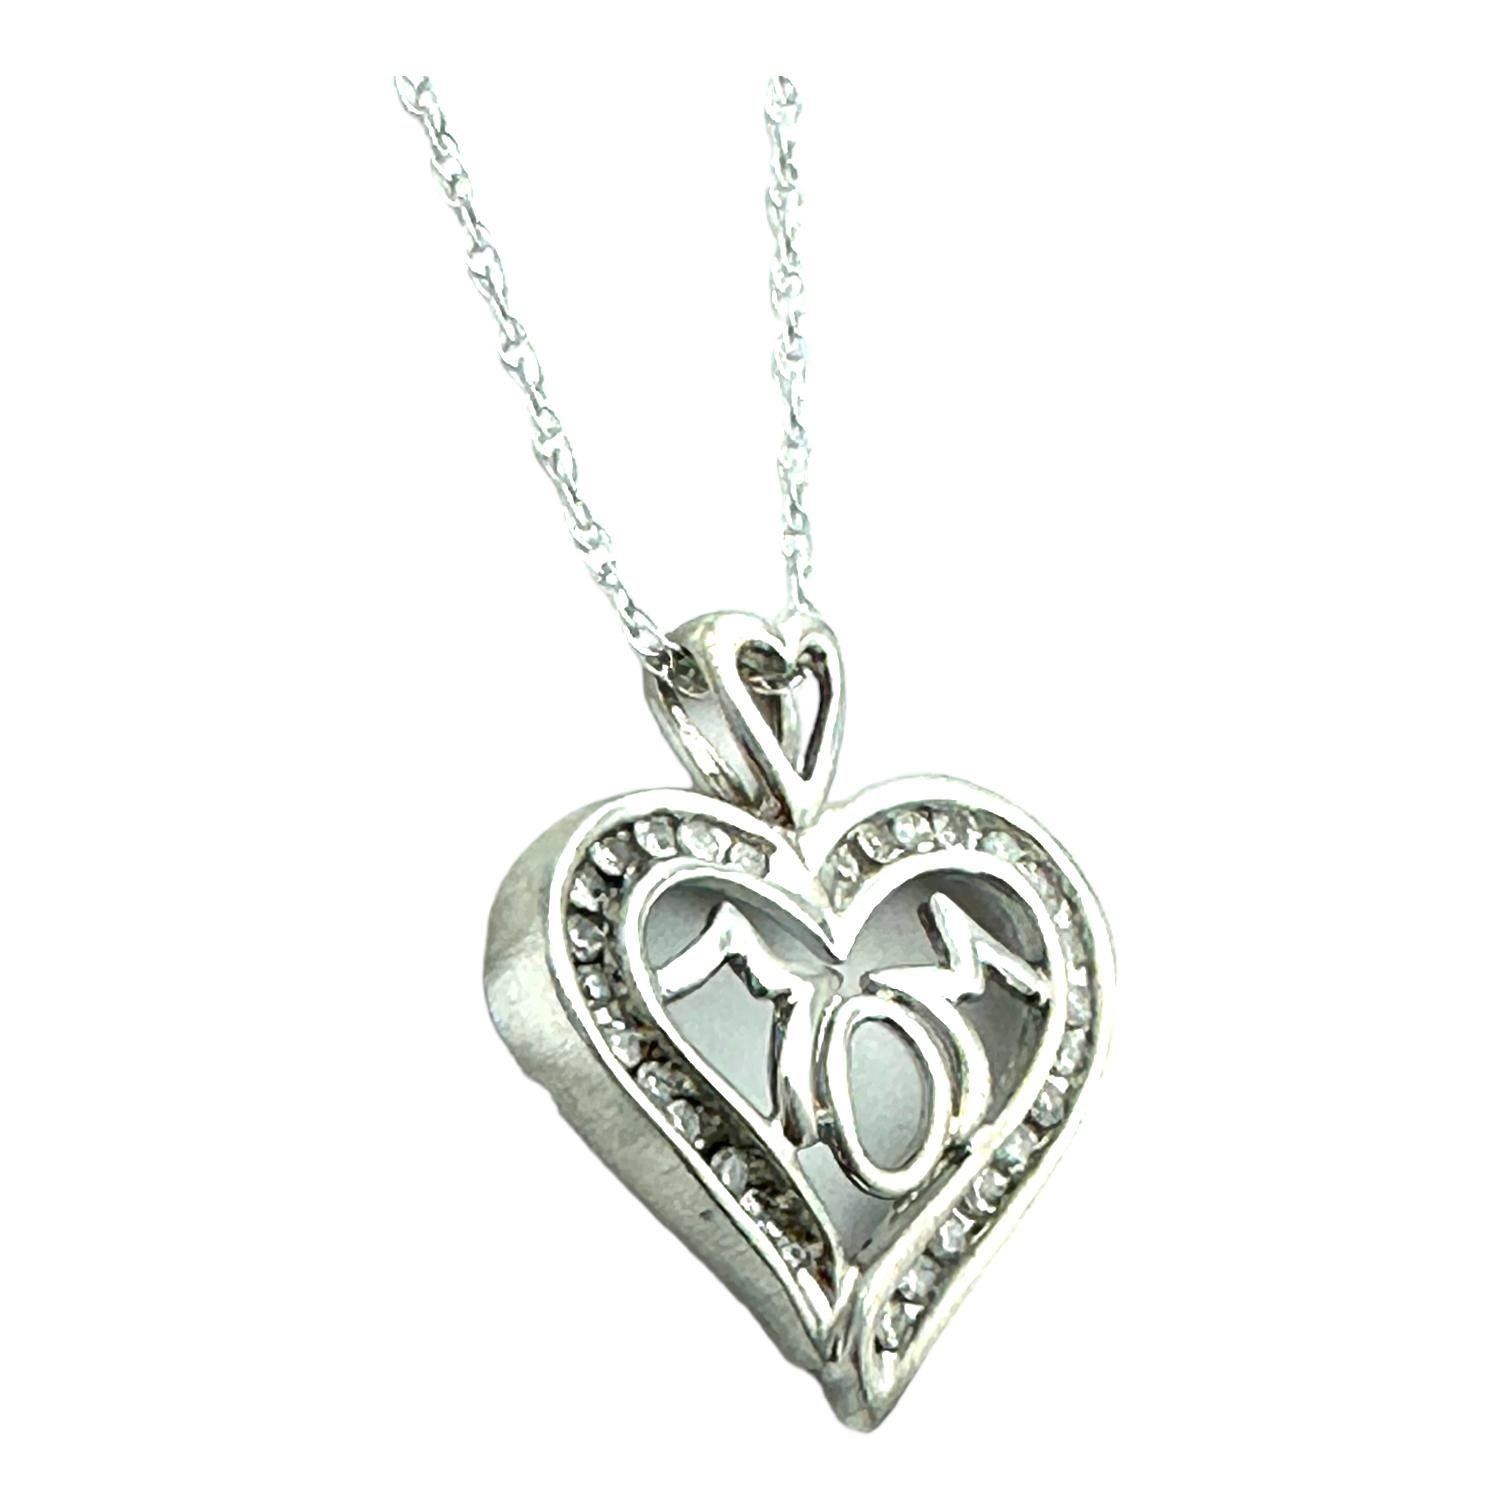 This gorgeous pendant is crafted from high-quality 10K white gold and is enhanced with 0.15 carat diamond set in the shape of a heart. This beautiful piece makes the perfect timeless gift for that special Mom in your life. Show your love with this